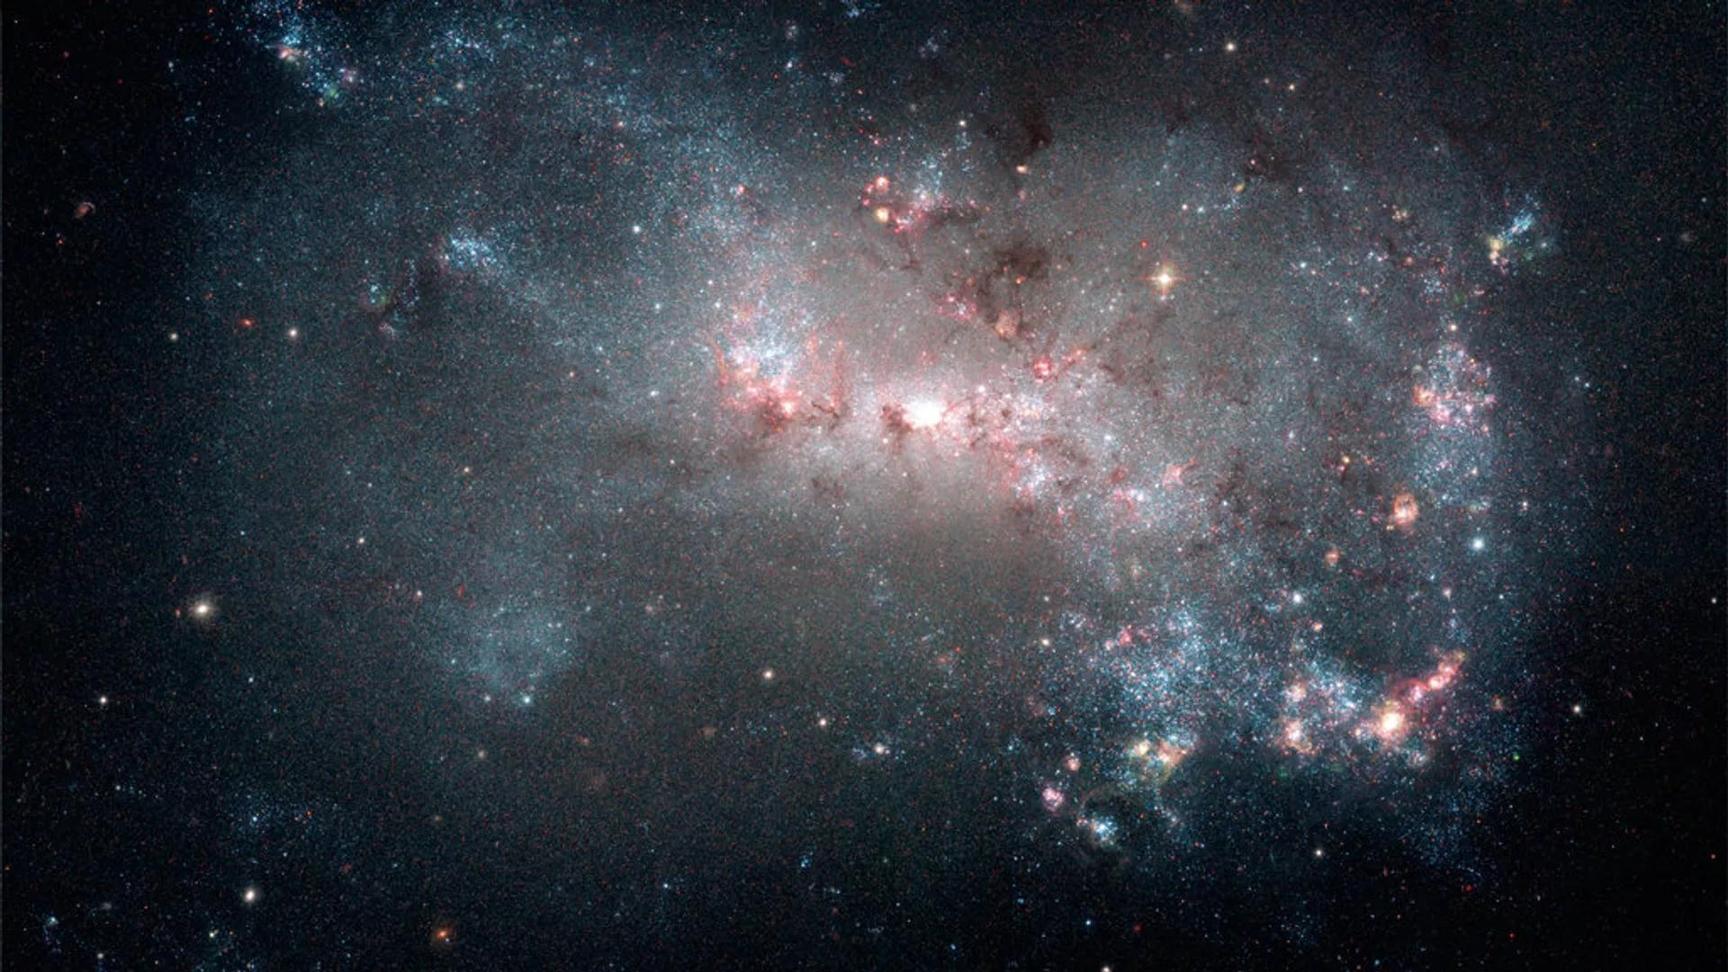 Hubble Telescope Uncovers Protective Secrets of Two Dwarf Galaxies